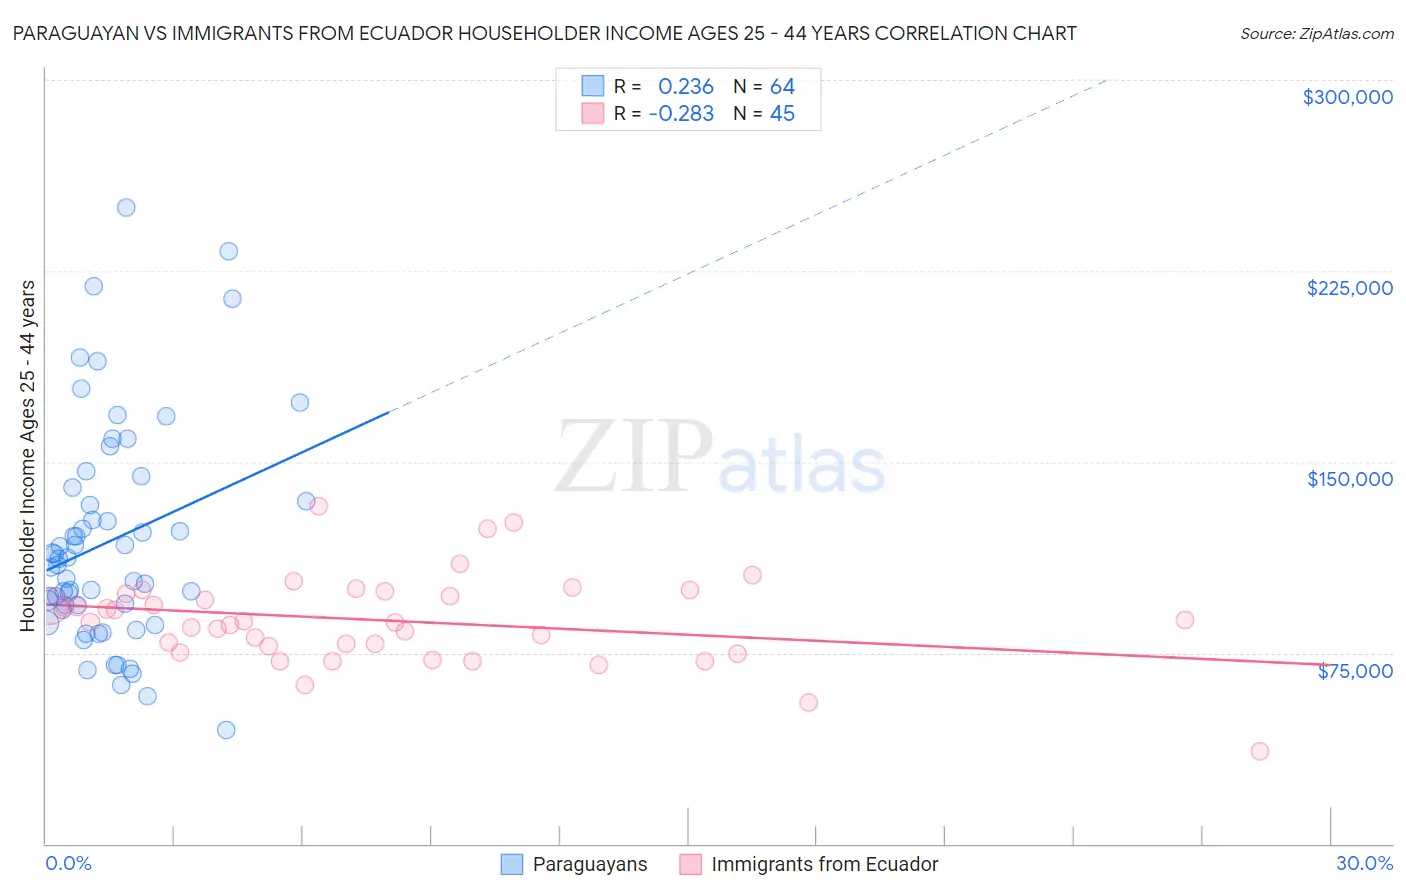 Paraguayan vs Immigrants from Ecuador Householder Income Ages 25 - 44 years